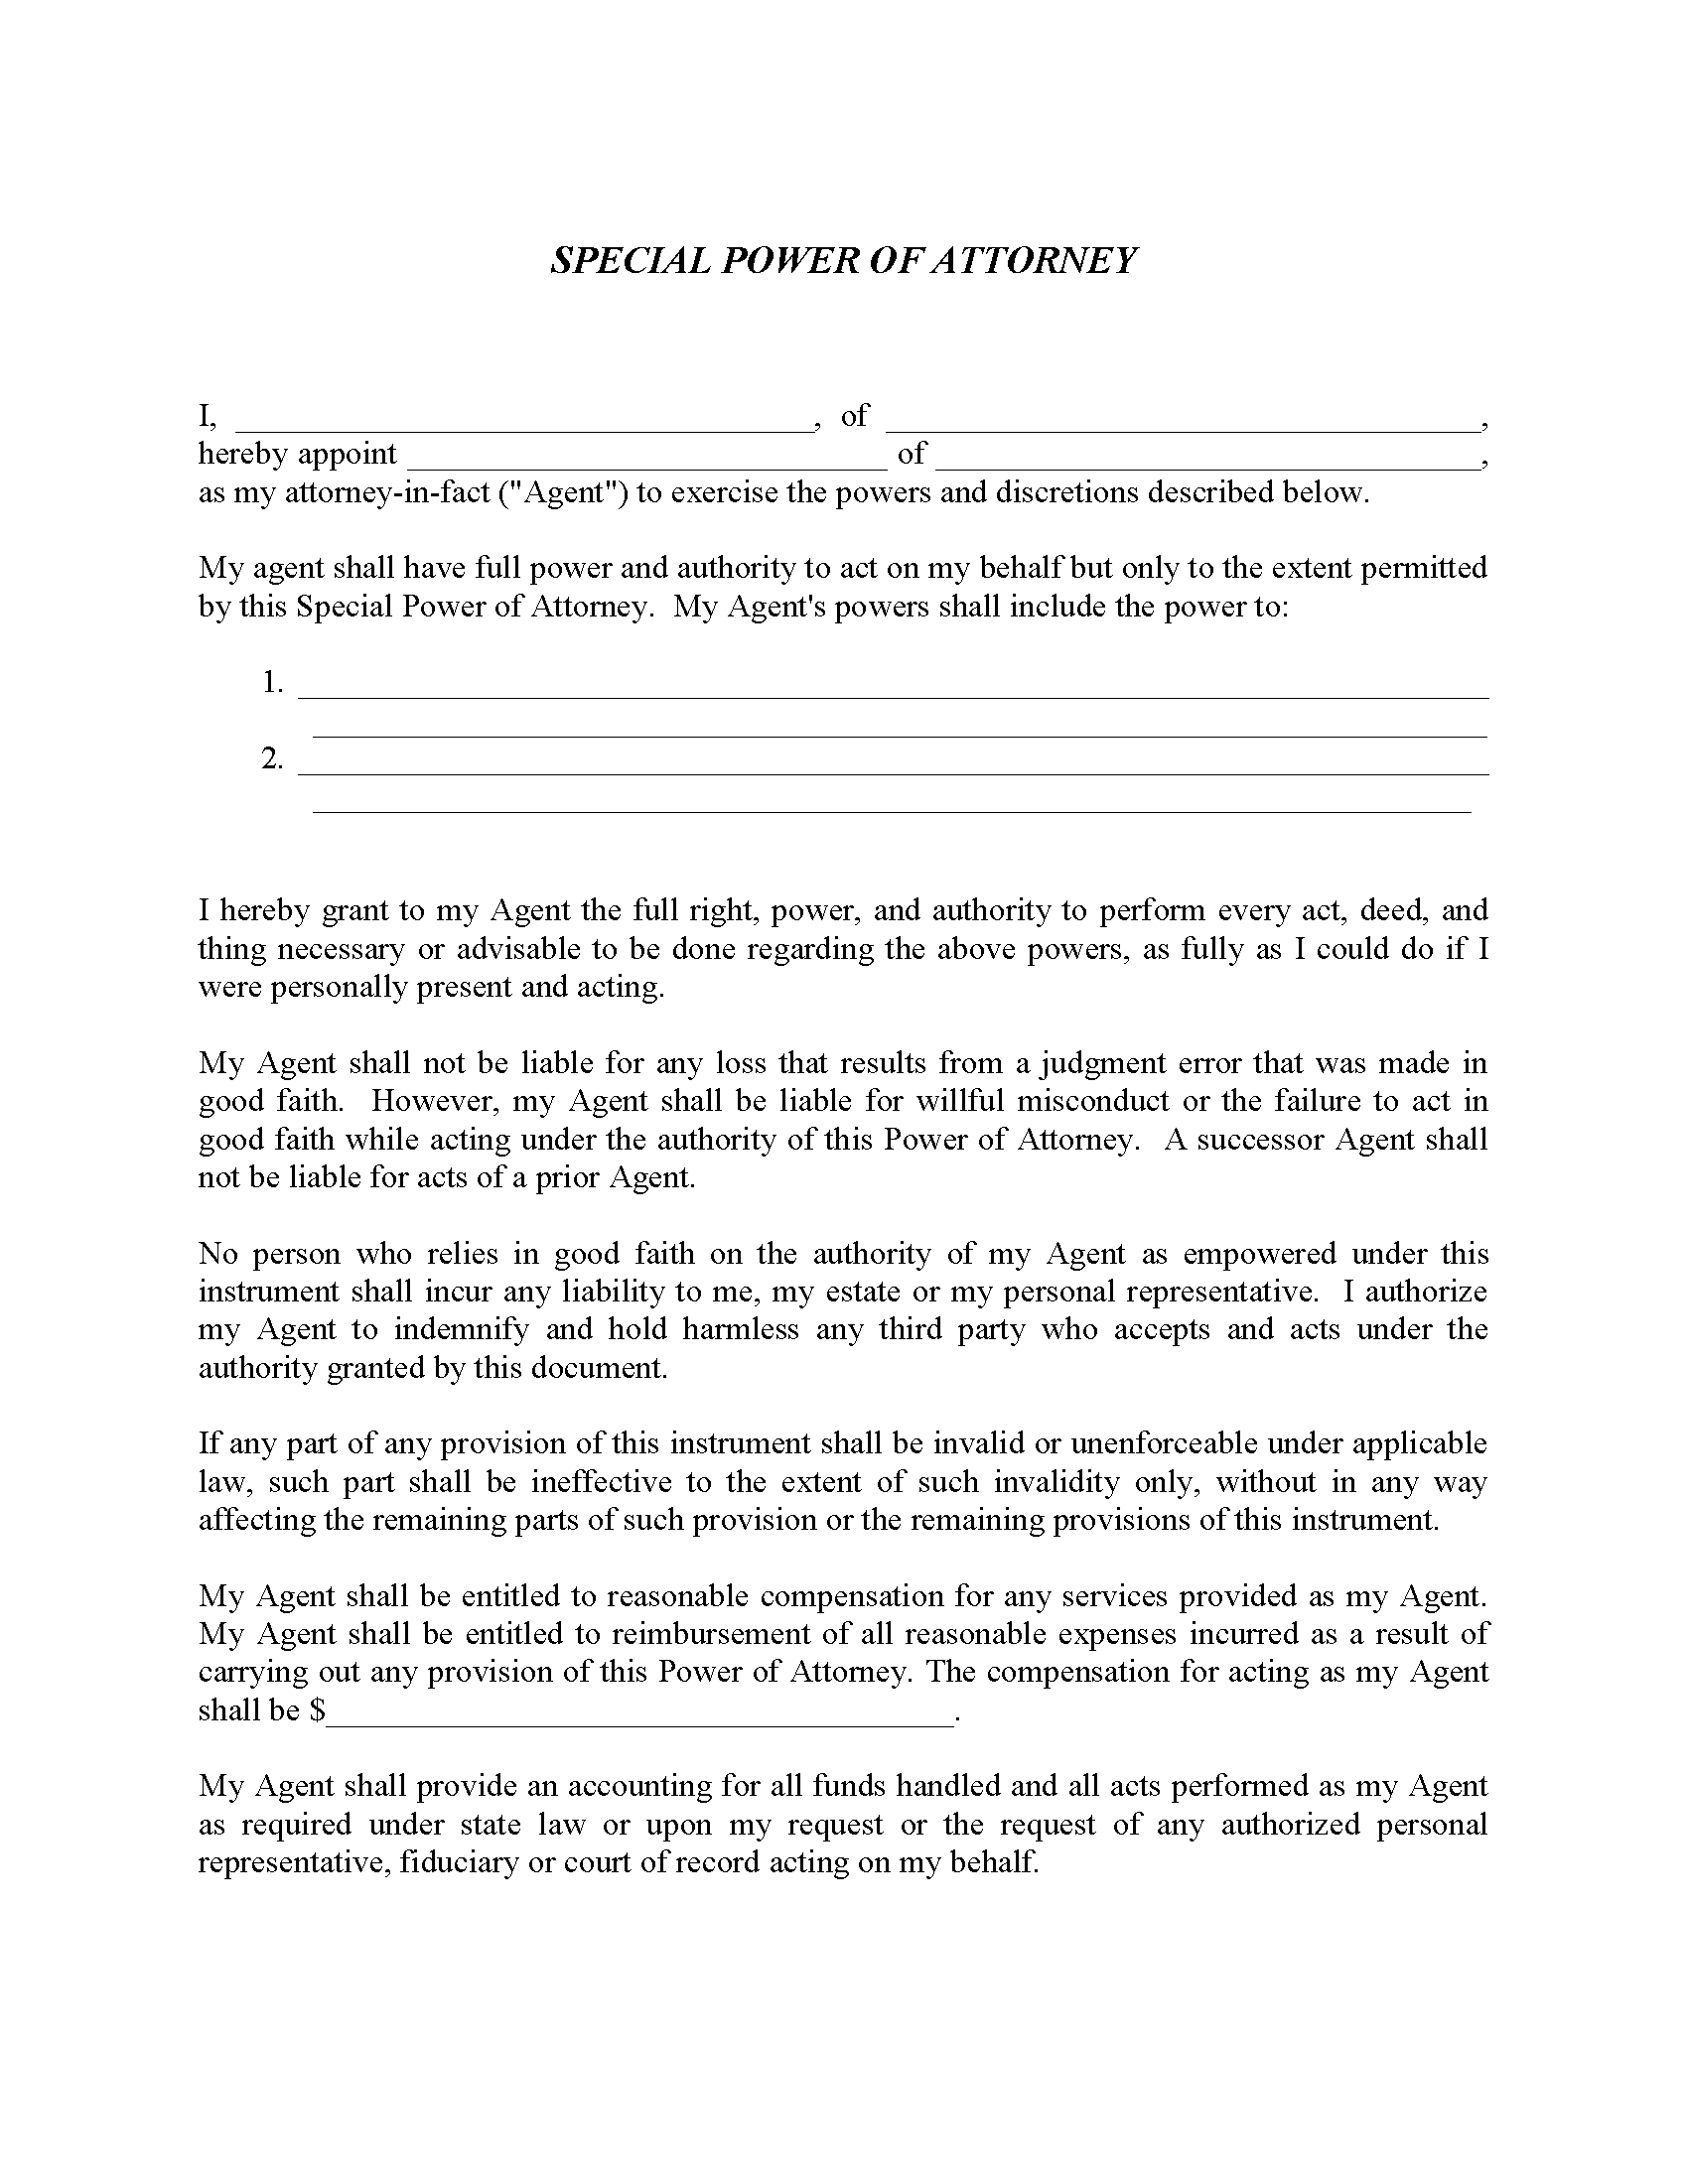 sars-special-power-of-attorney-form-download-pdf-free-10-sample